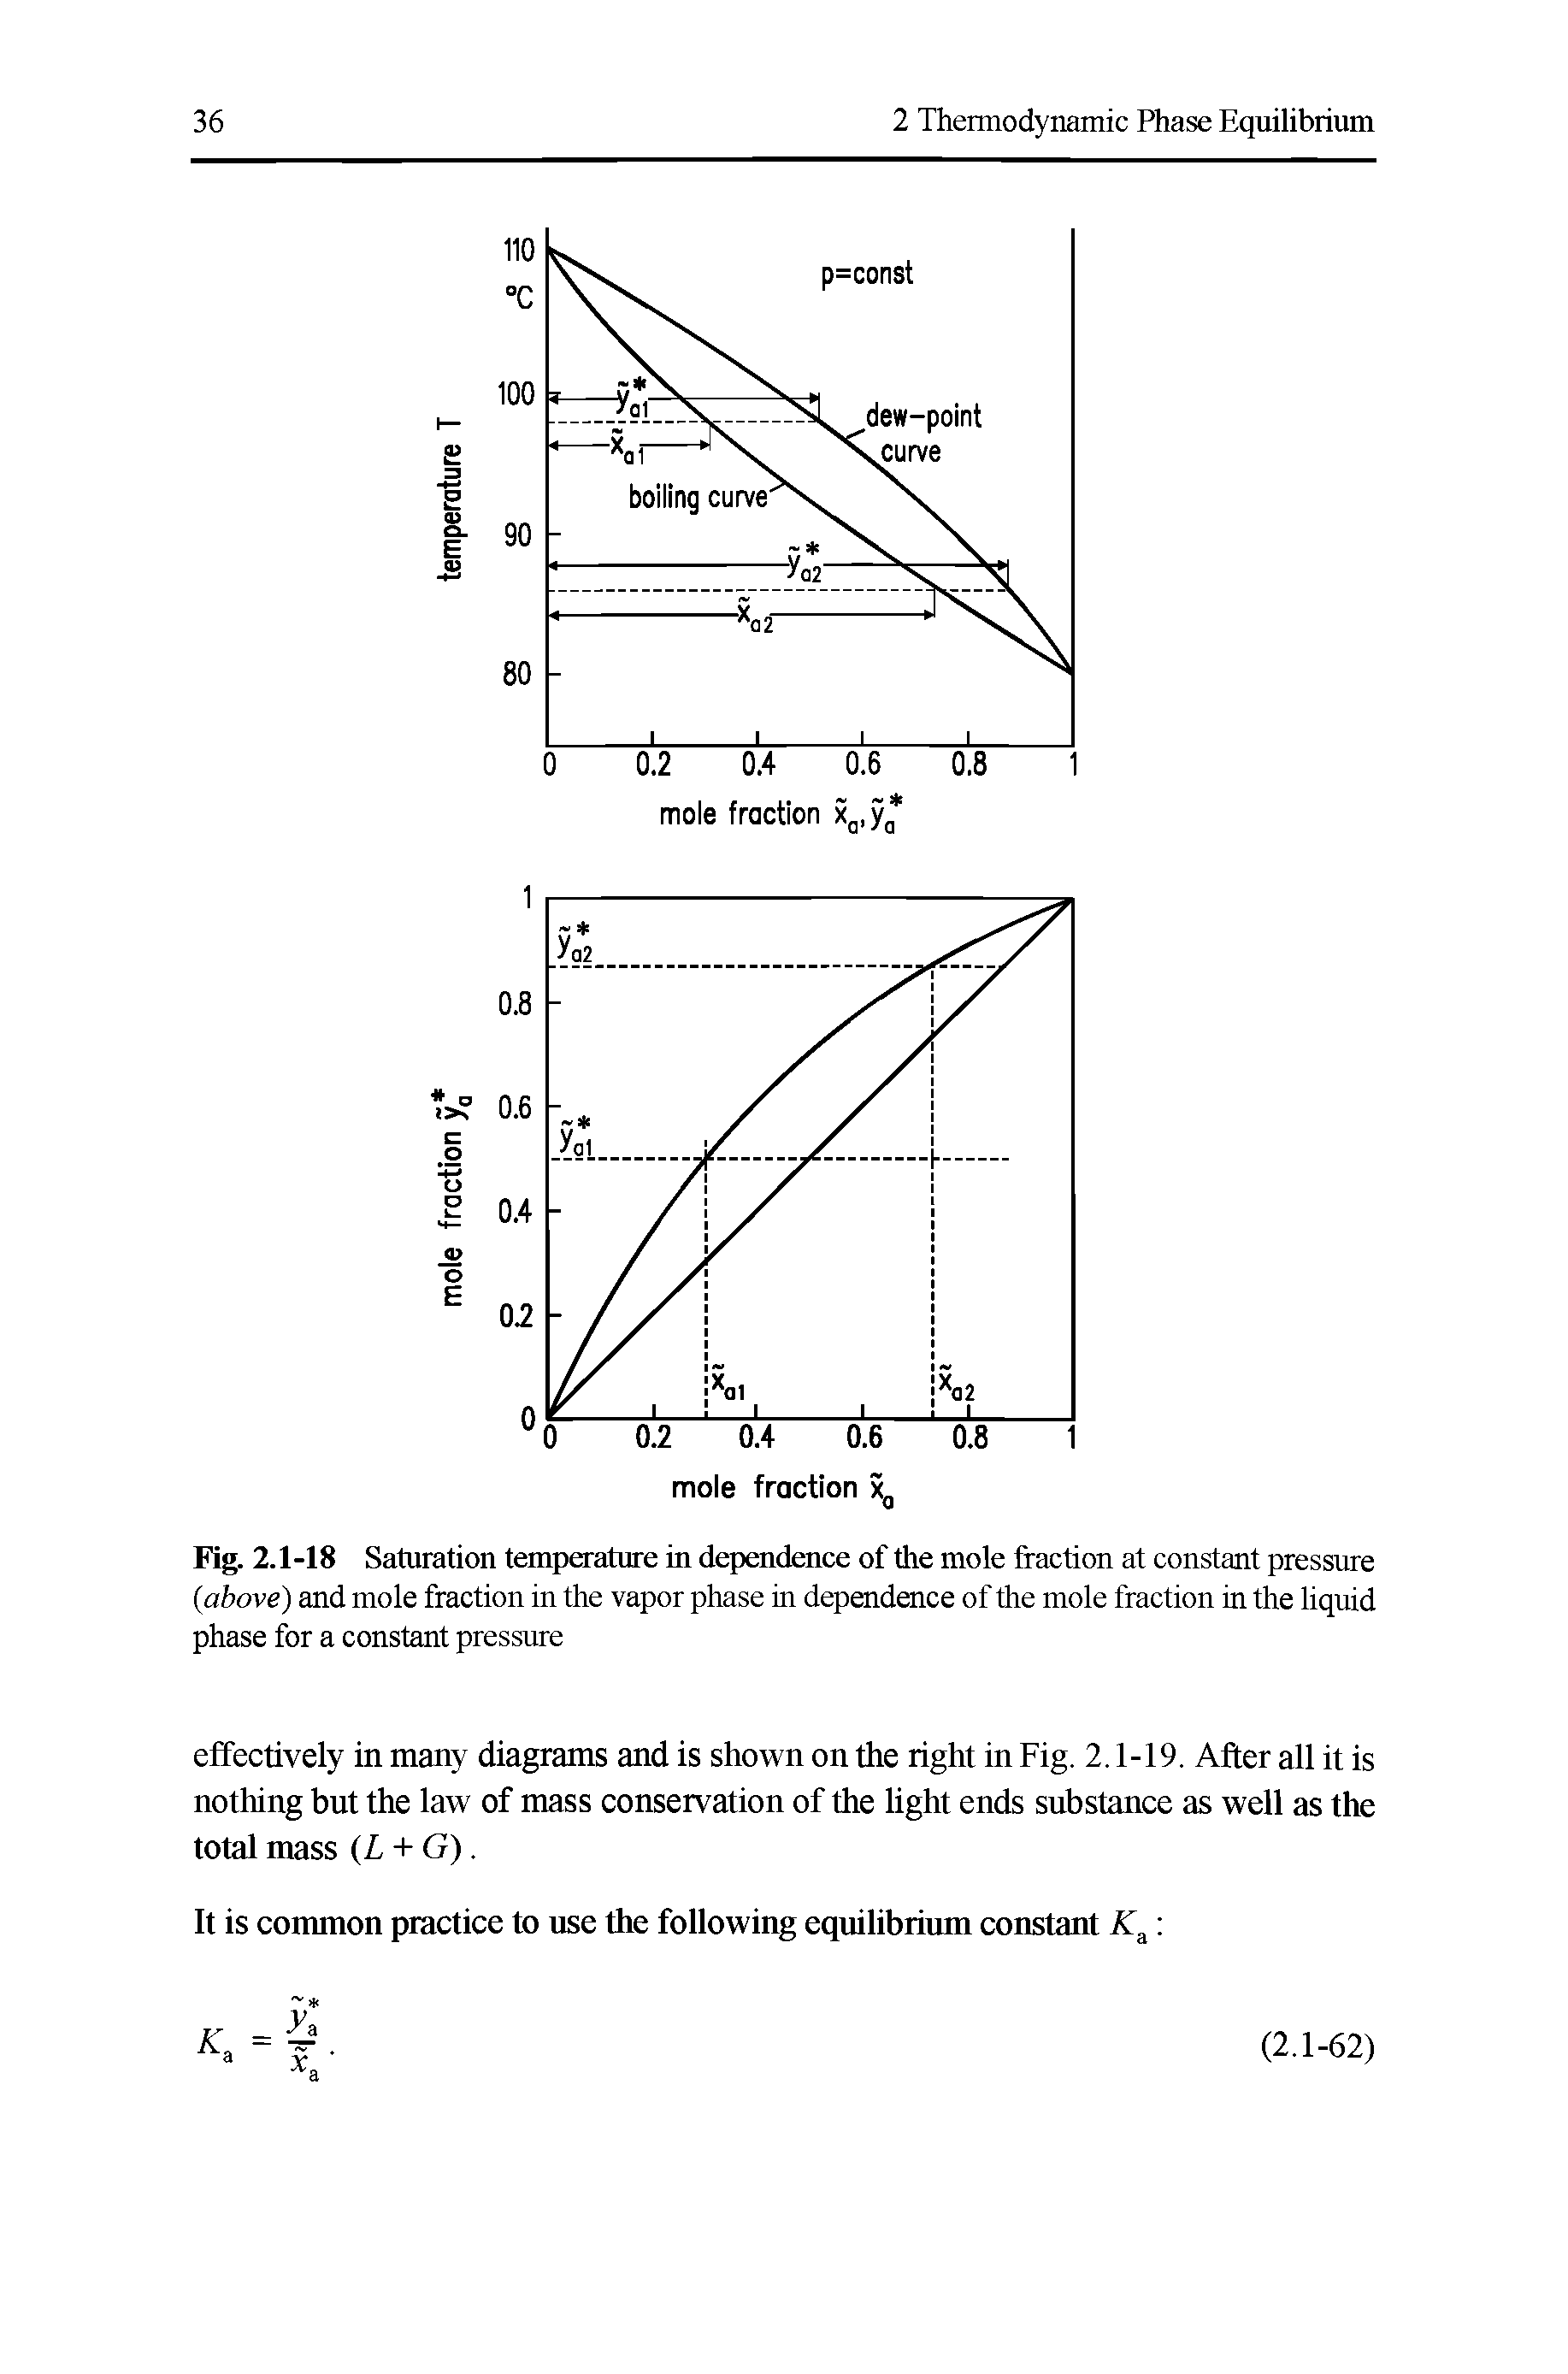 Fig. 2.1-18 Saturation temperature in dependence of the mole fraction at constant pressure (above) and mole fraction in the vapor phase in dependence of the mole fraction in the liquid phase for a constant pressure...